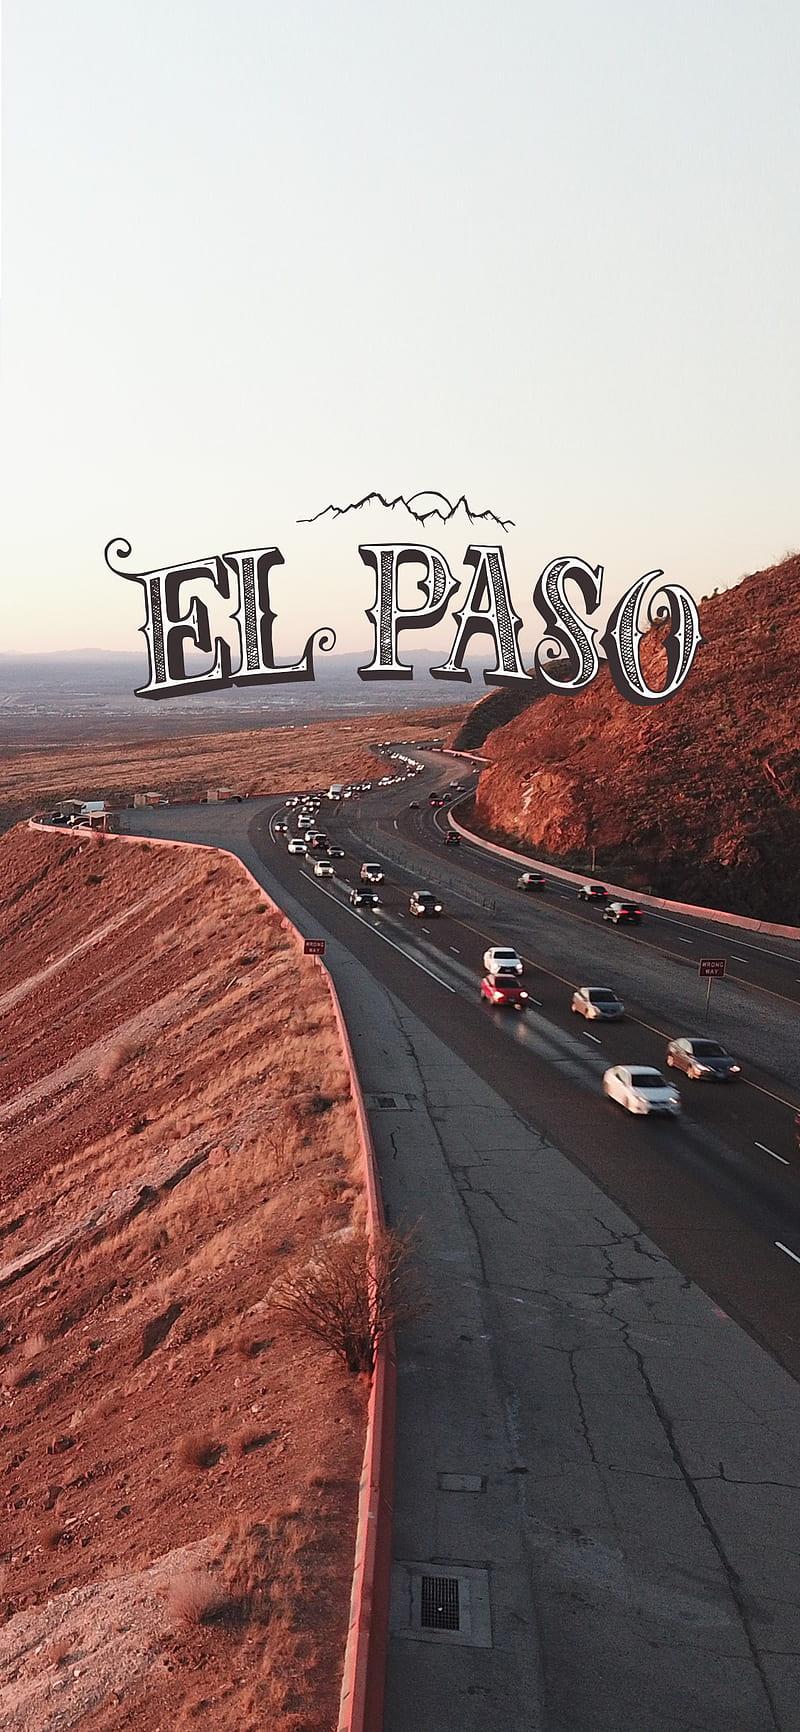 El Paso, hand drawn, hand lettered, lettering, logo, mountains, road, texas, HD phone wallpaper